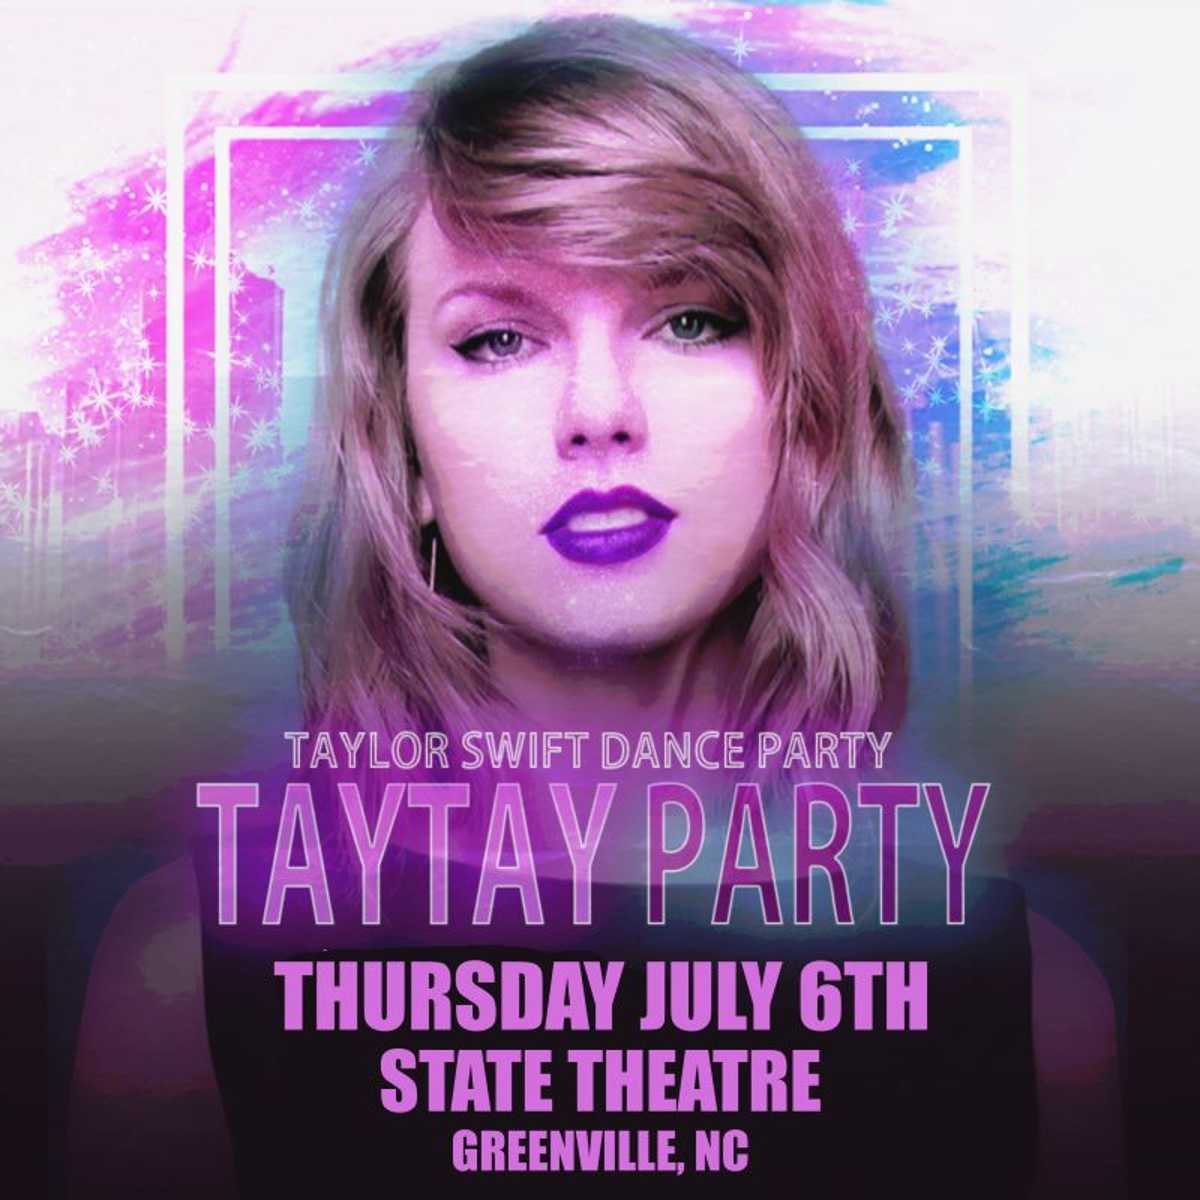 TAYTAY PARTY Taylor Swift Dance Party (All Ages Show) State Theatre